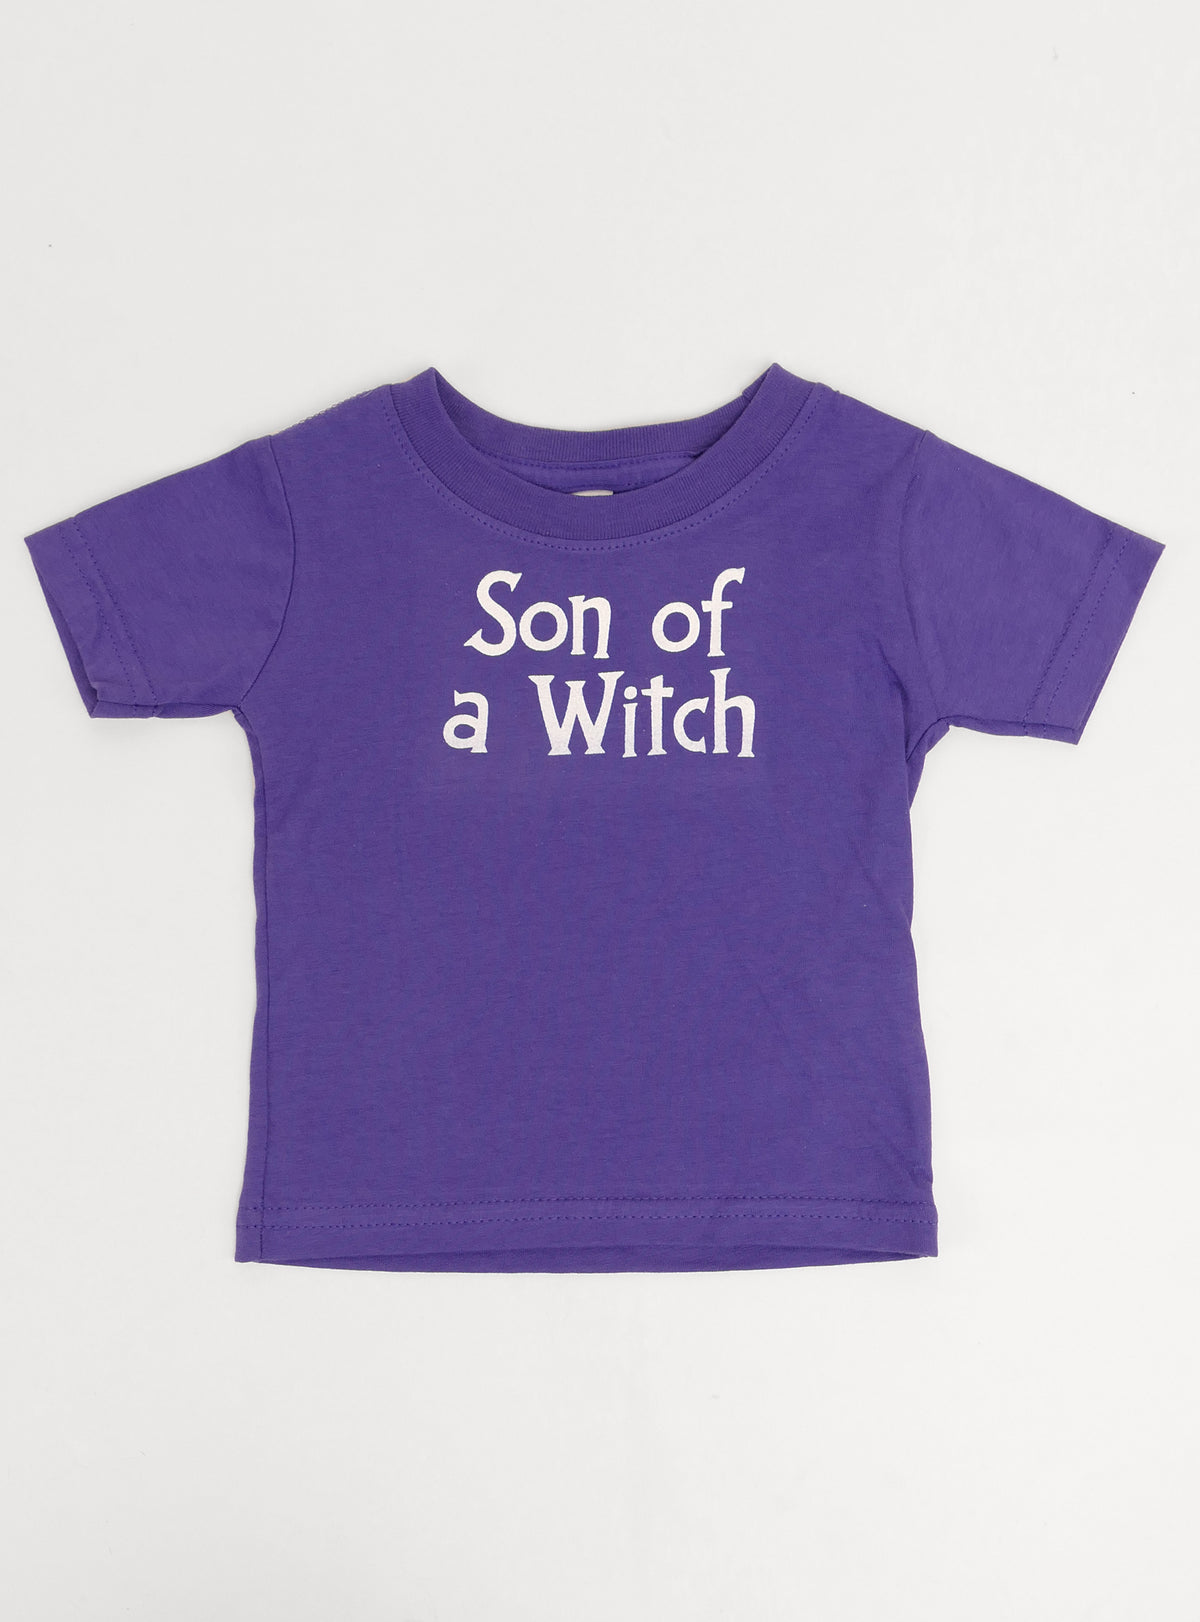 Son of a Witch Dog Tee